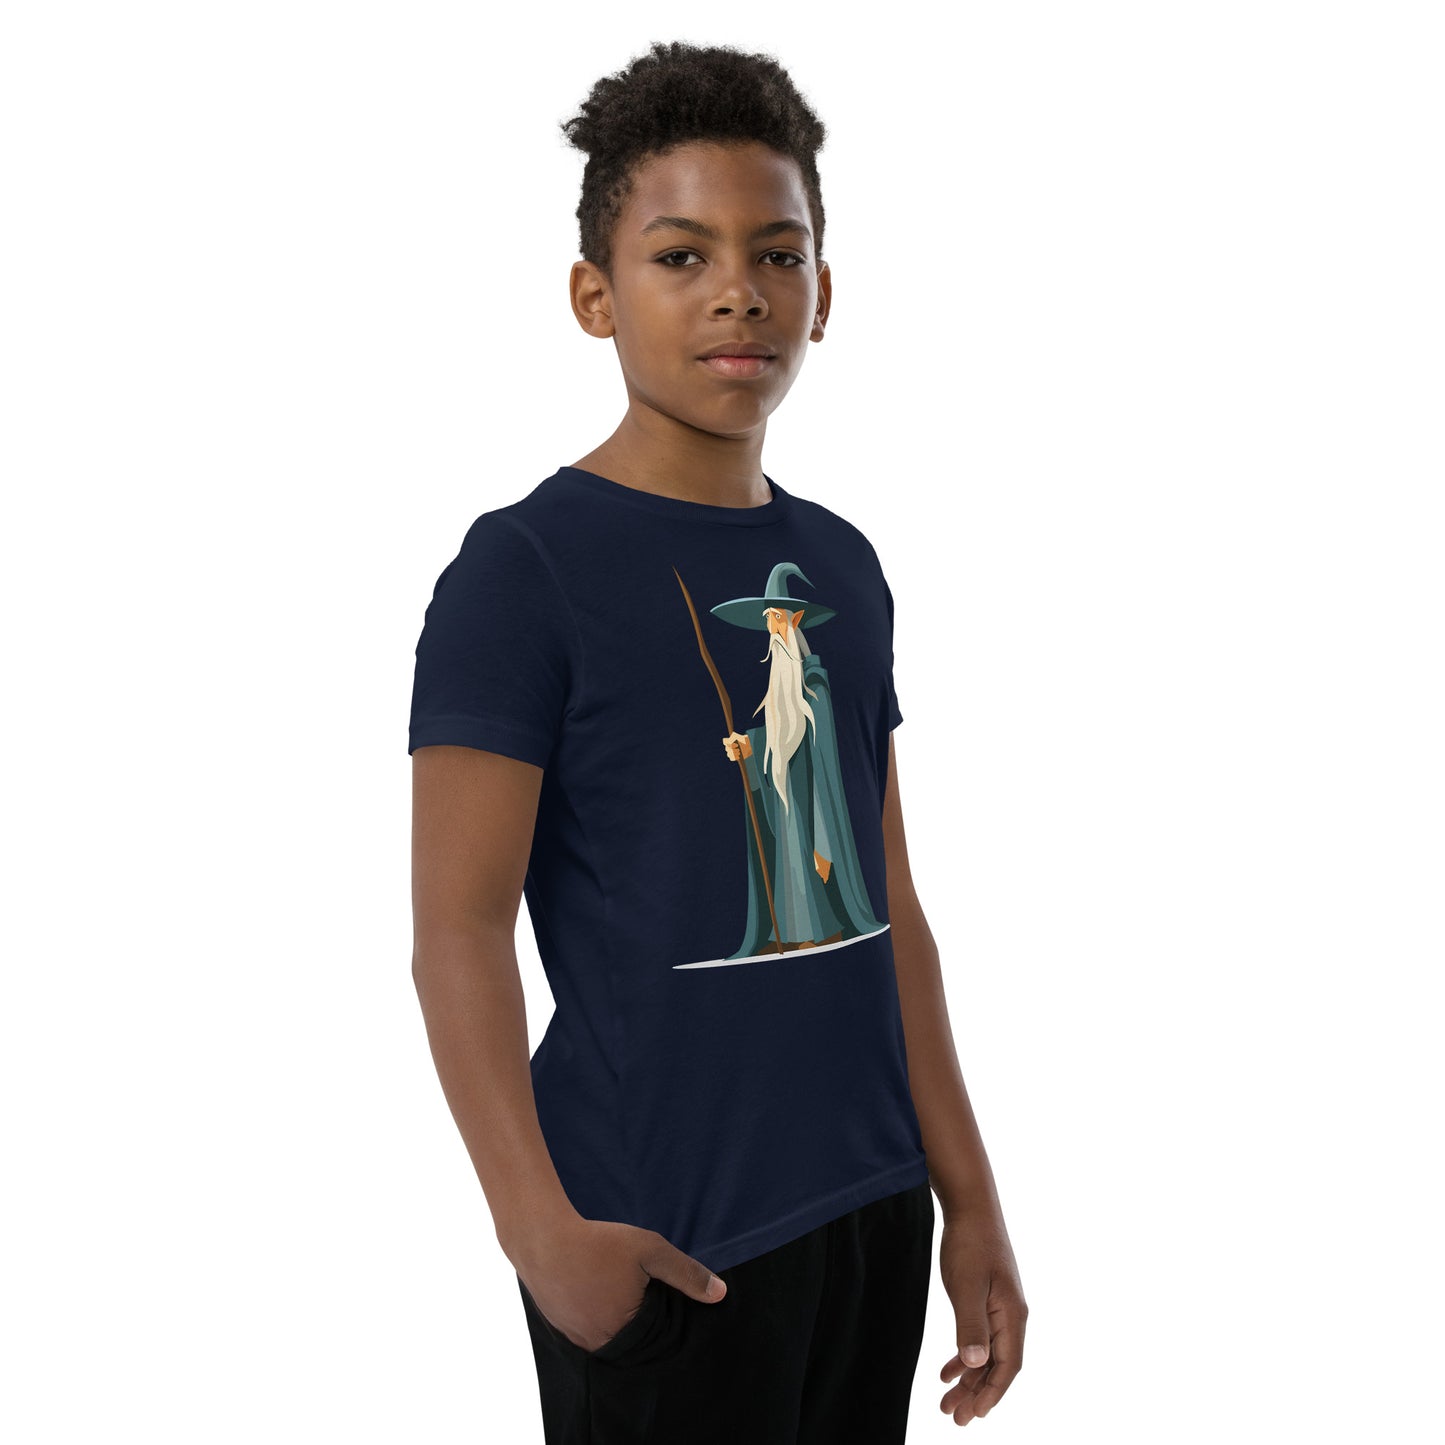 Boy with a navy T-shirt with a picture of a magician